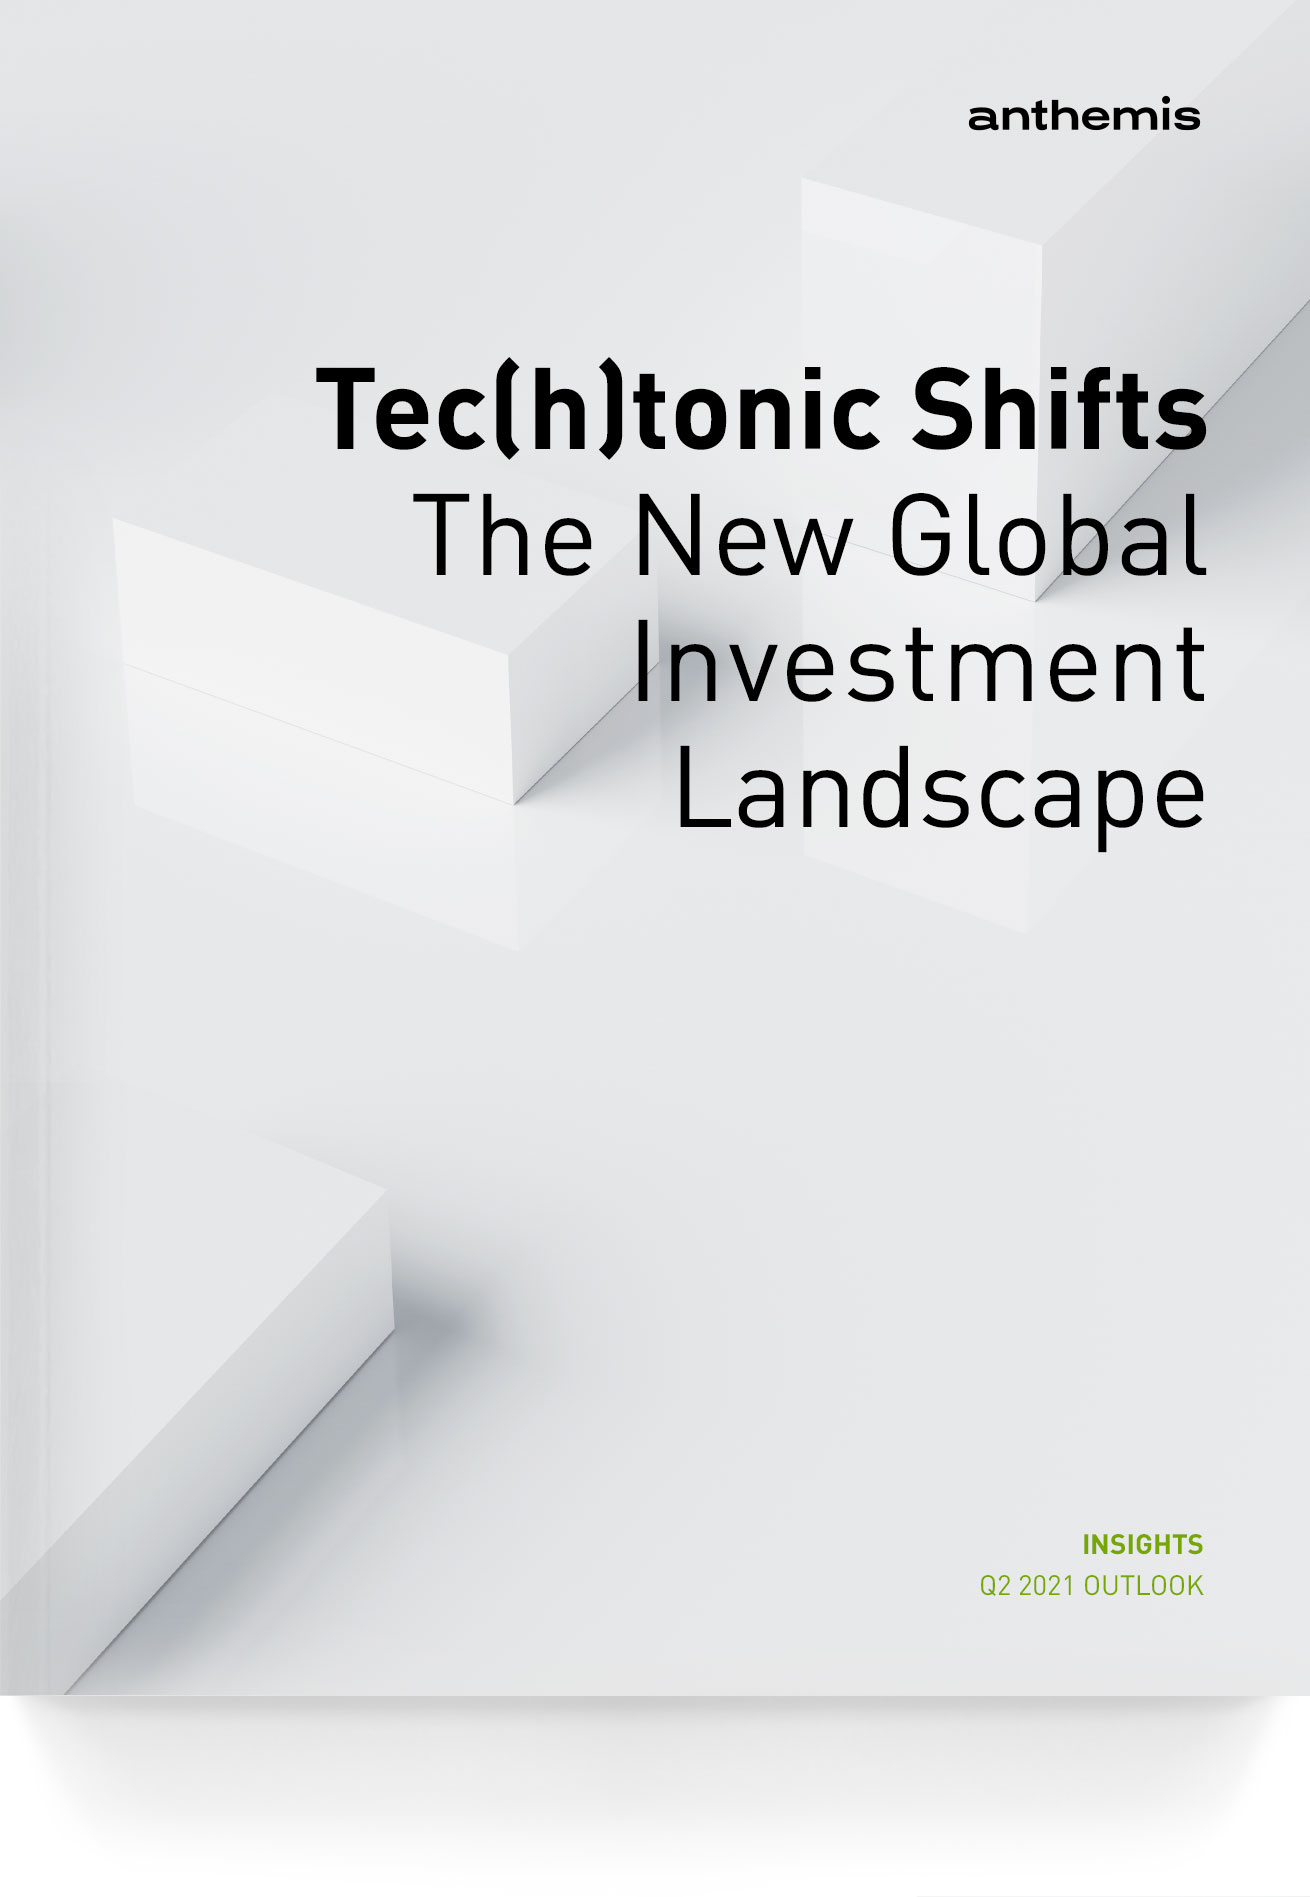 Quarterly-Insights-2021-Q2-Techtonic-Shifts-The-New-Global-Investment-Landscape-4